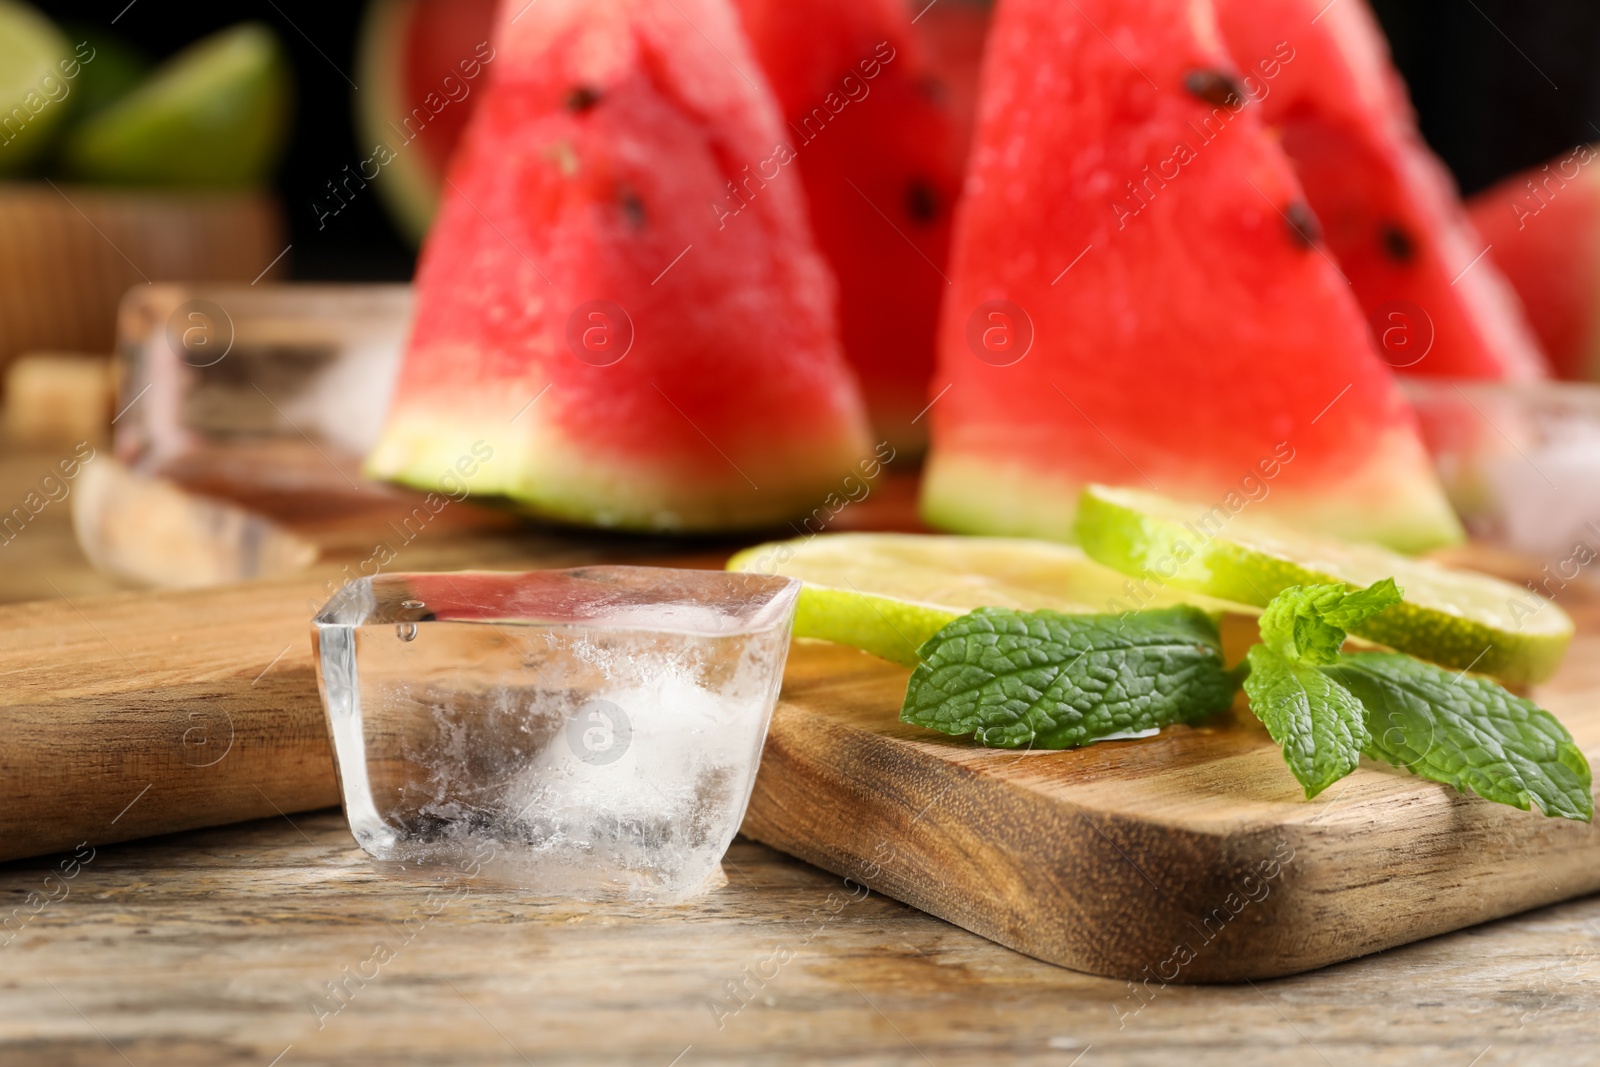 Photo of Board with ice, juicy watermelon and lime slices on wooden table, closeup